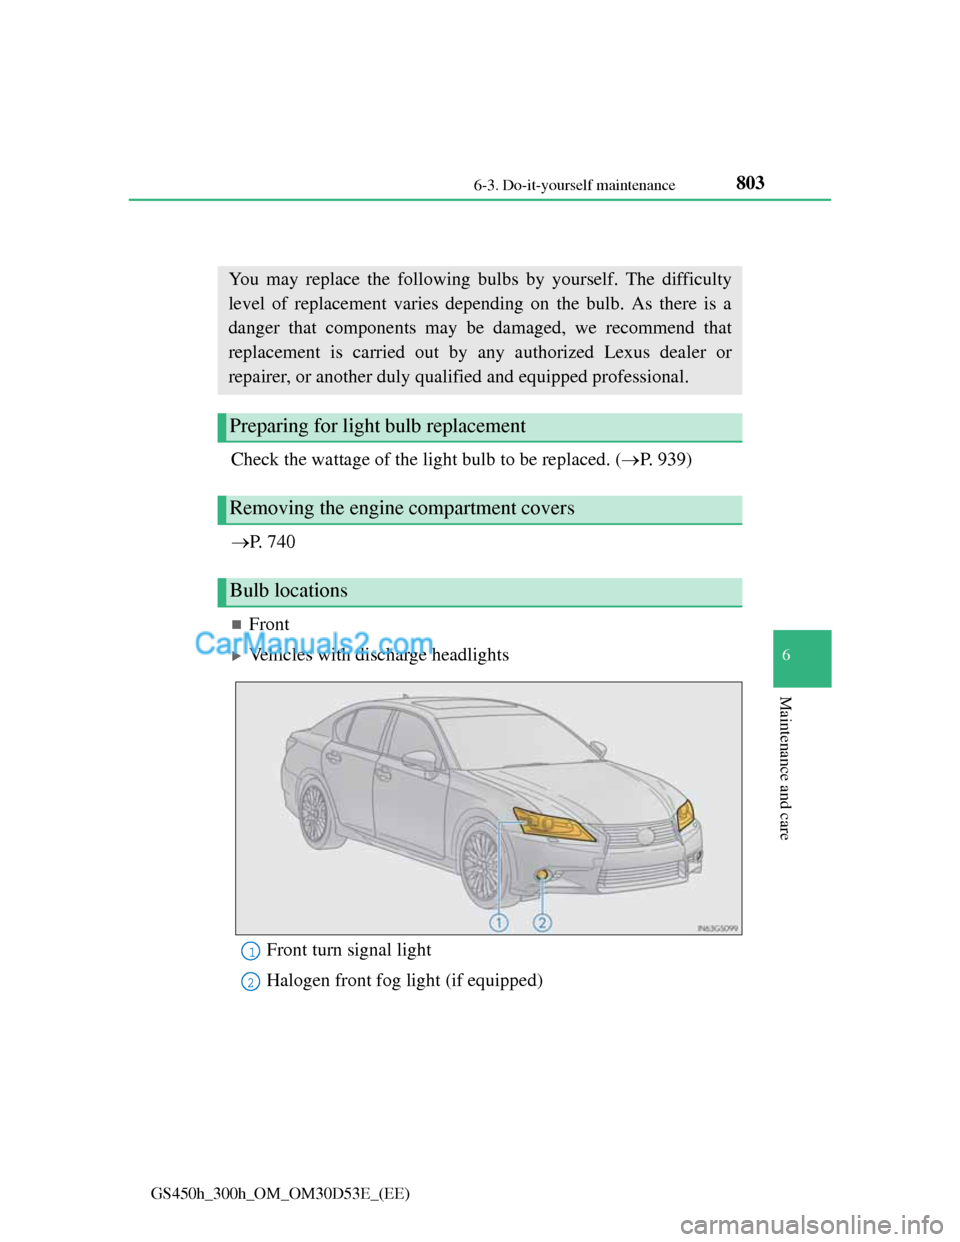 Lexus GS300h 2013  Owners Manual 803 6-3. Do-it-yourself maintenance
6
Maintenance and care
GS450h_300h_OM_OM30D53E_(EE)
Light bulbs
Check the wattage of the light bulb to be replaced. (P. 939)
P. 740
Front
Vehicles with 